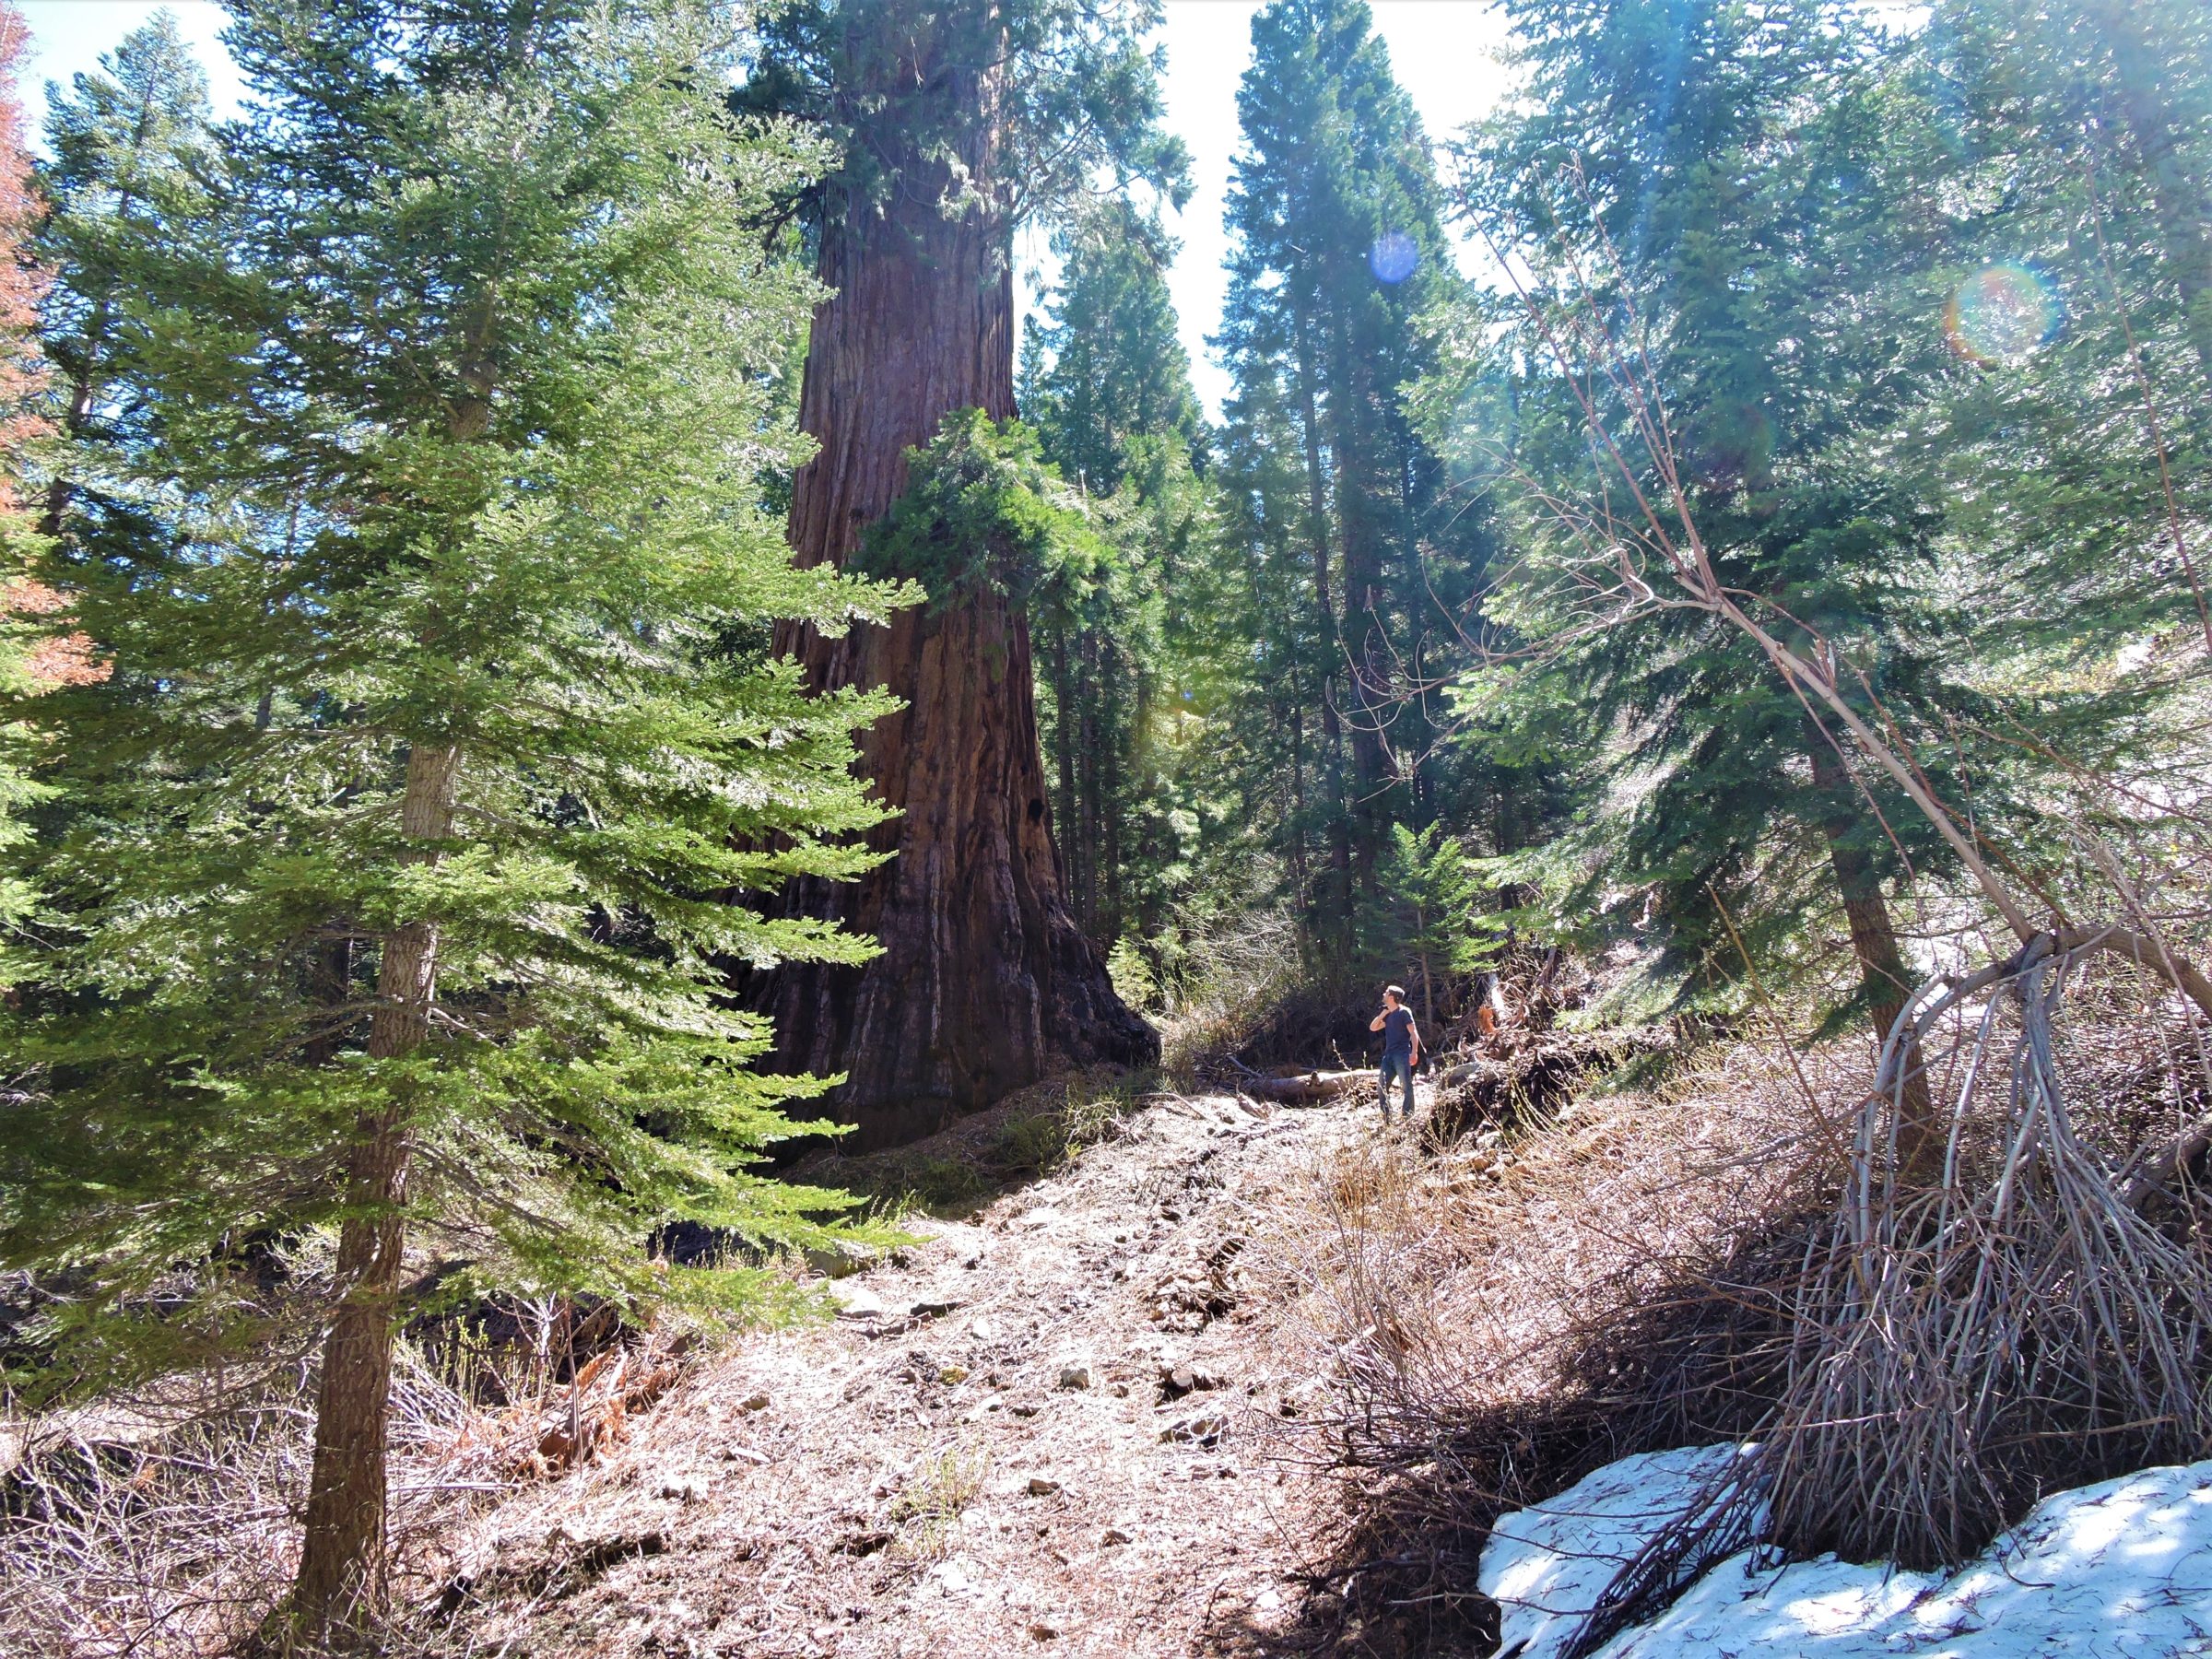 Standing next to a Sequoia tree